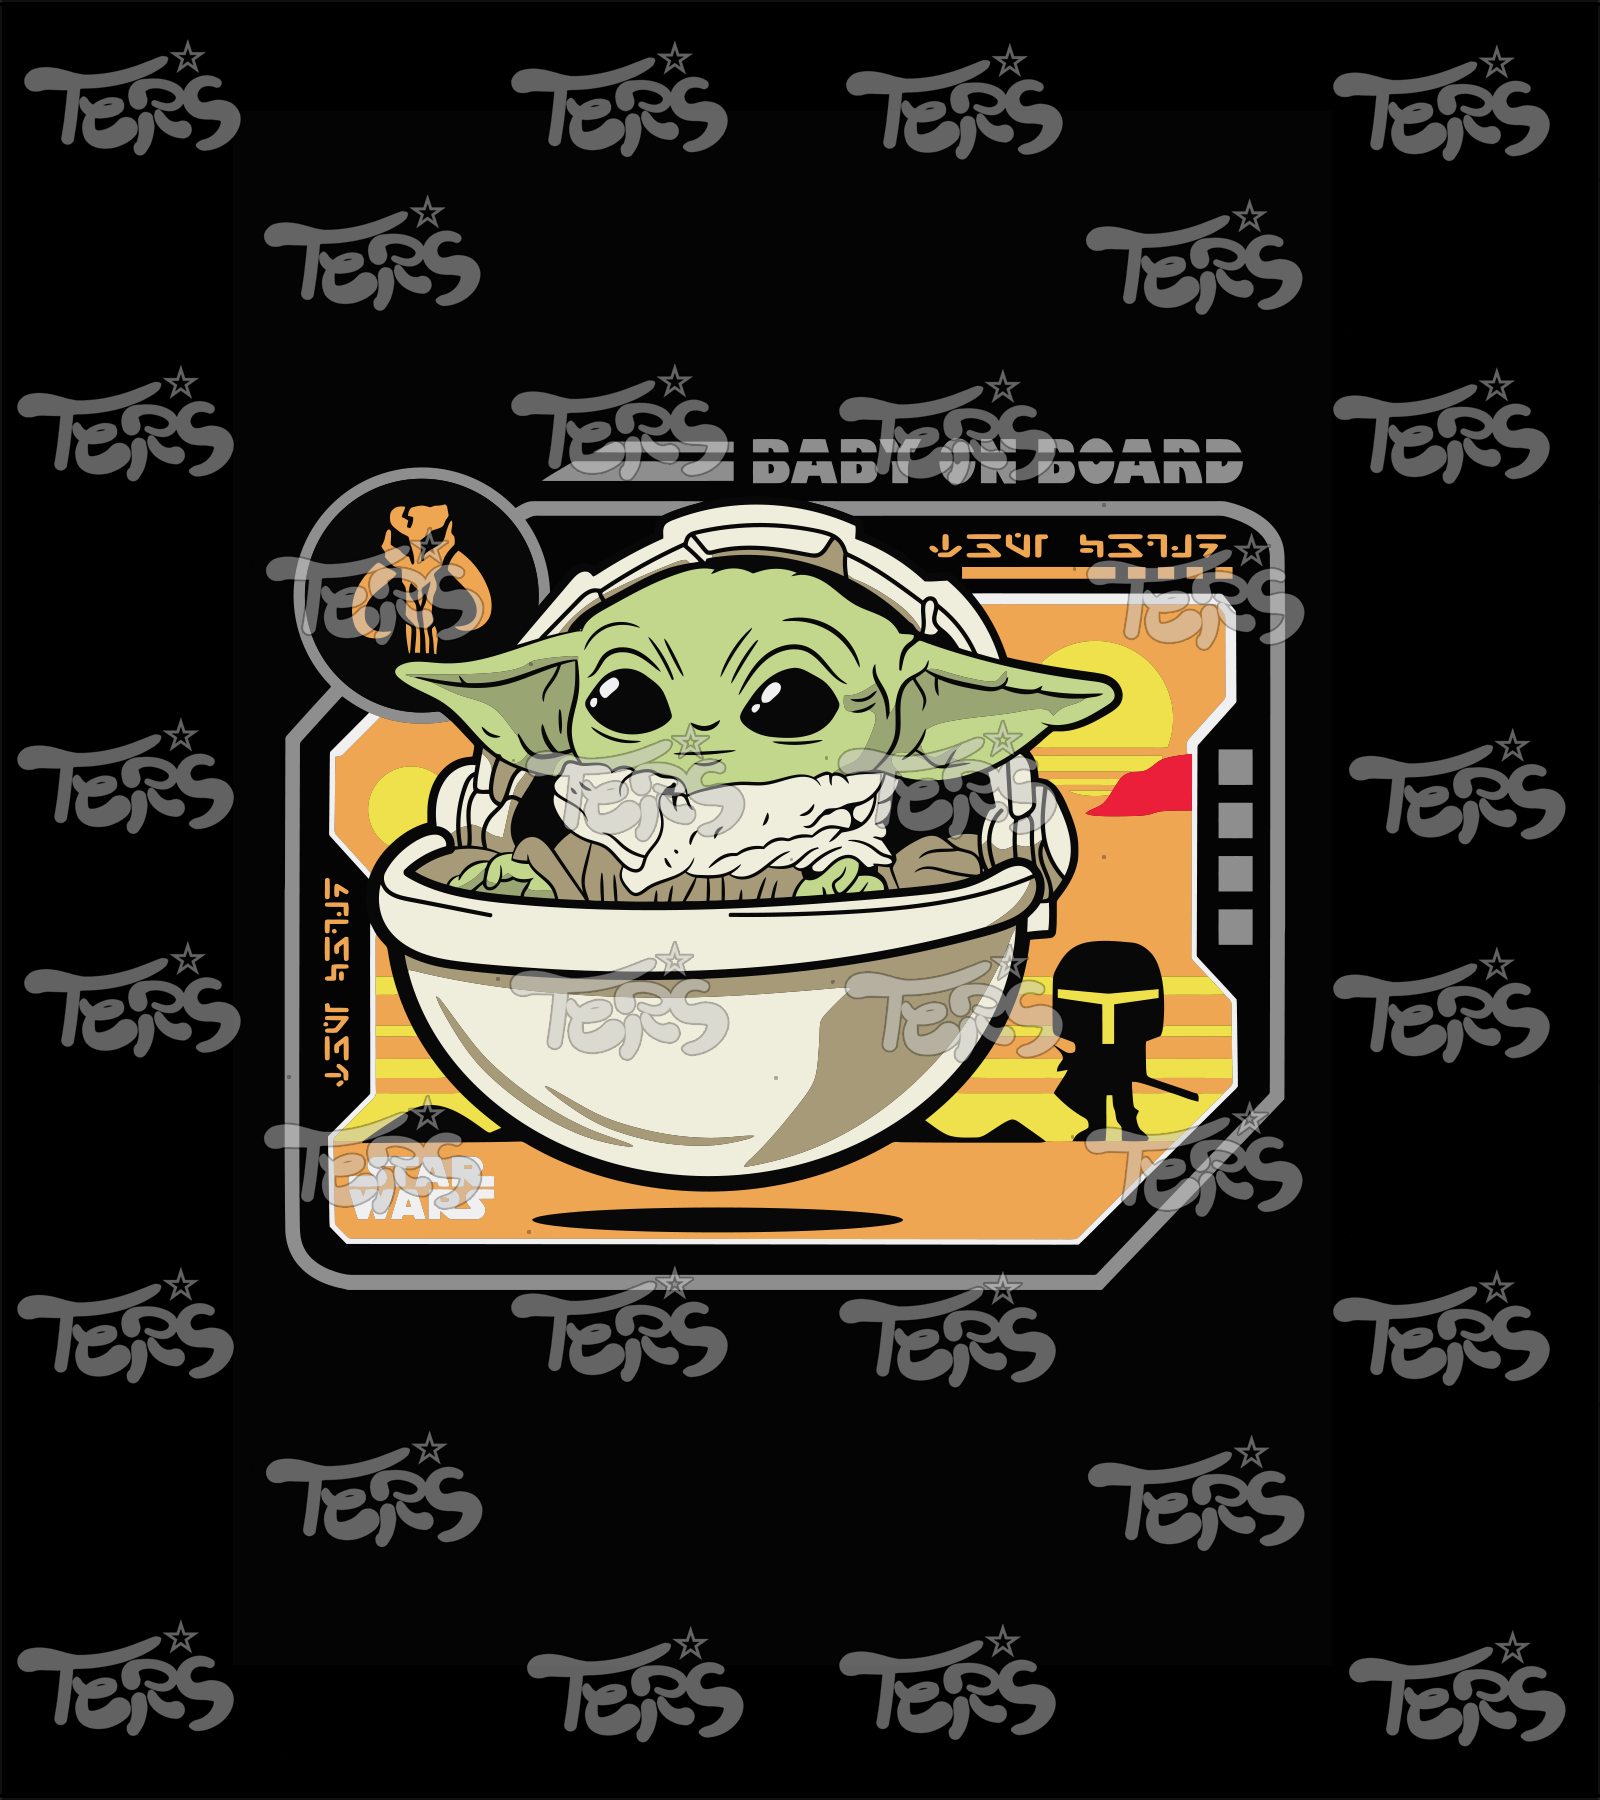 Mouse Pad Baby Yoda On Board